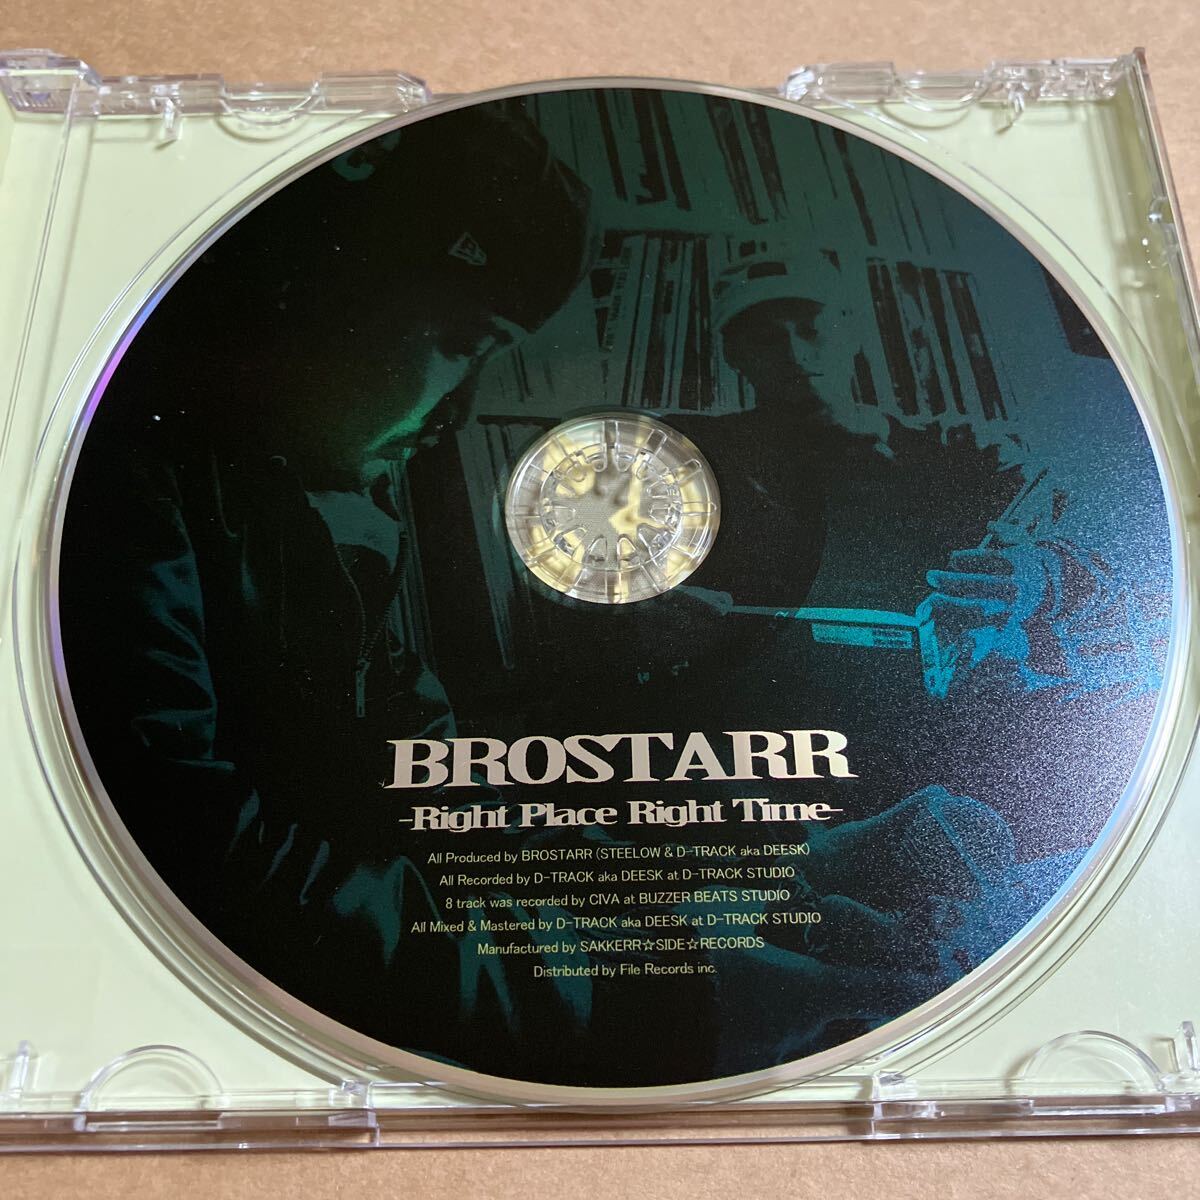 CD BROSTARR / RIGHT PLACE RIGHT TIME SSRB0005 ブロスター STEELOW : D-TRACK aka DEESK : サイプレス上野_画像3